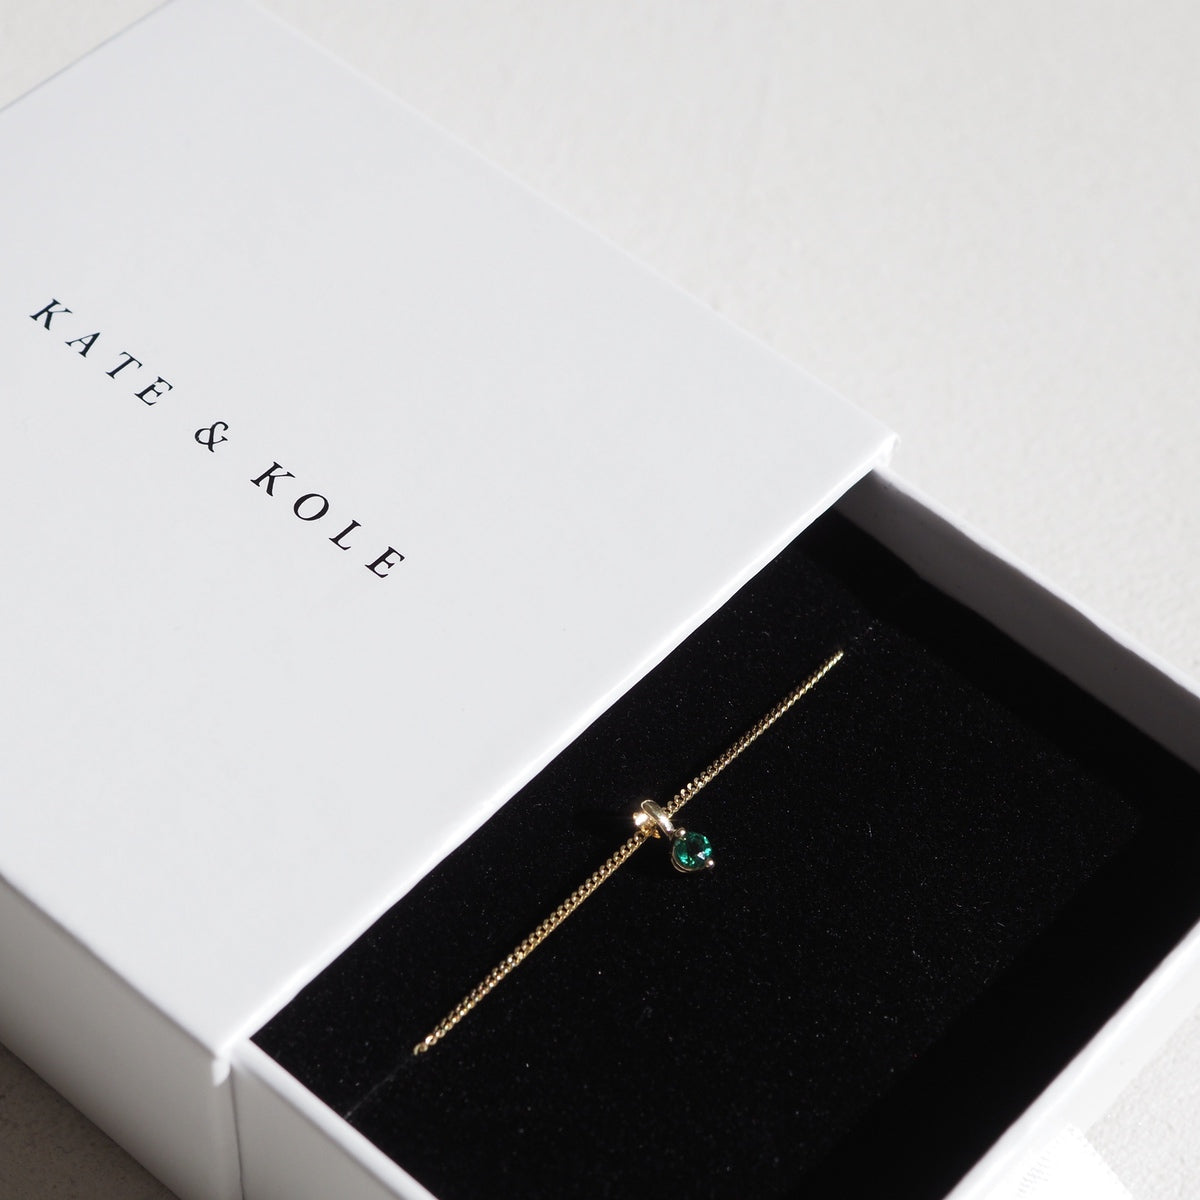 Our 9ct yellow gold birthstone necklace with an emerald stone on a 45cm diamond curb chain wrapped up in our Kate & Kole jewellery box